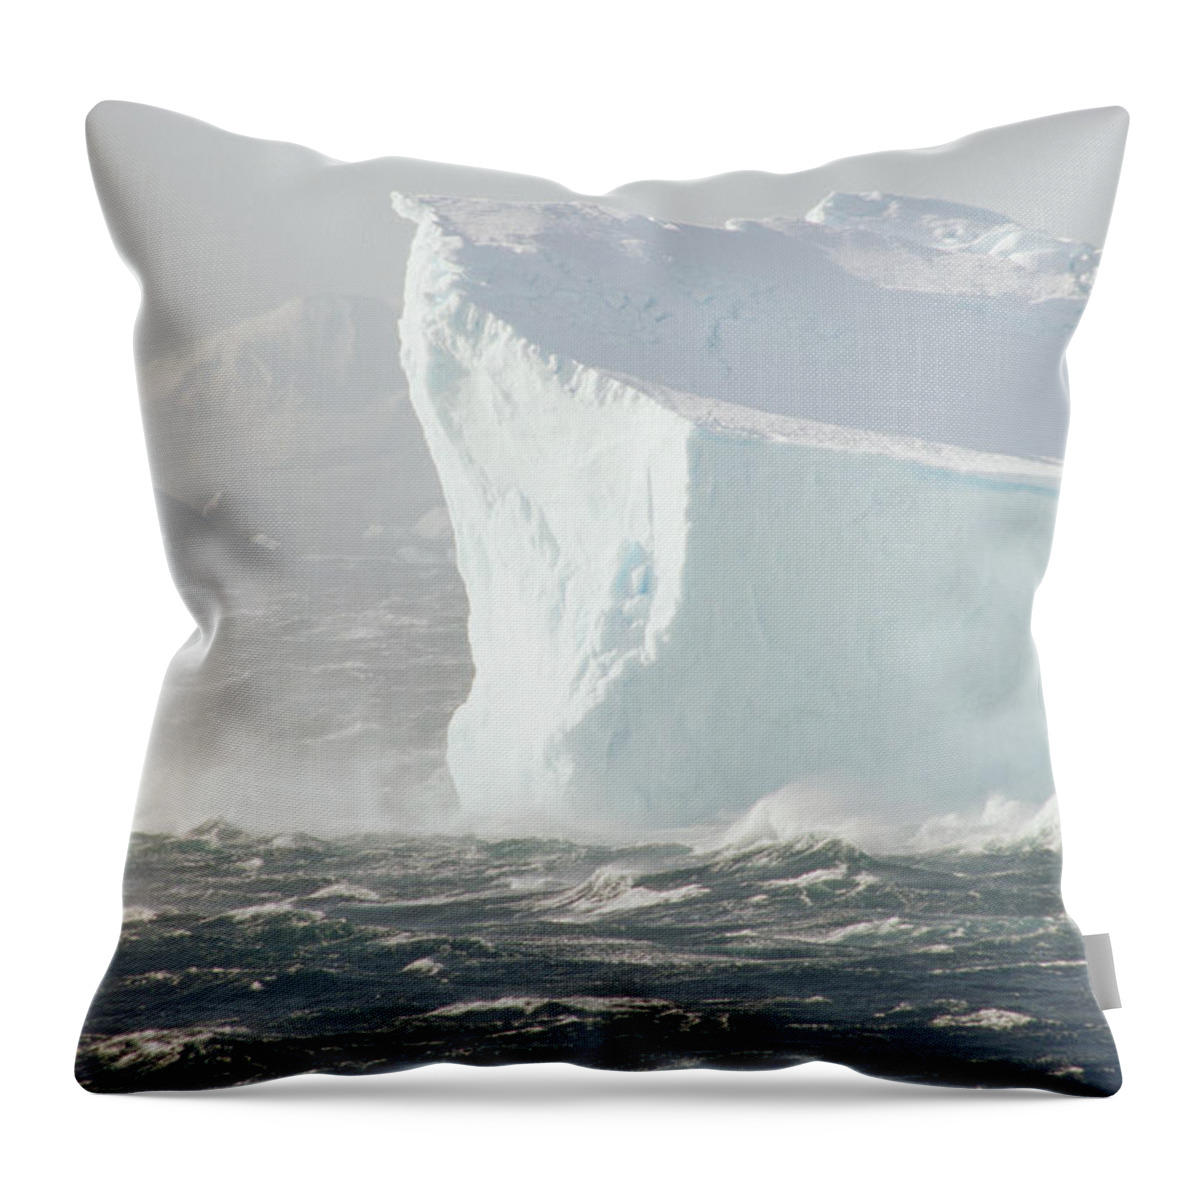 002060056 Throw Pillow featuring the photograph Iceberg In Bransfield Strait by Gerry Ellis